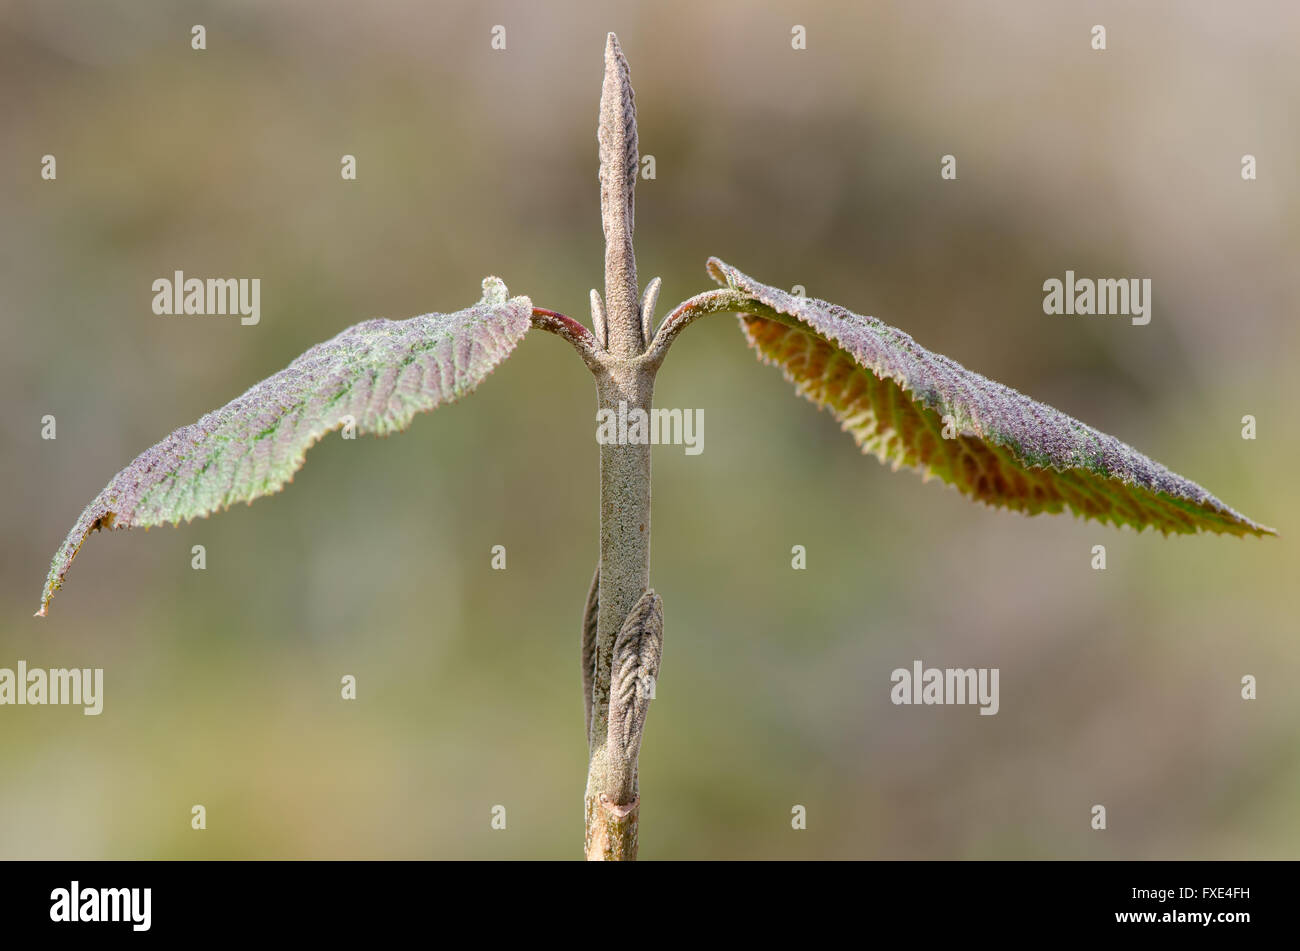 Common whitebeam (Sorbus aria agg.). Leaf bud of British tree in Spring, in the rose family (Rosaceae), showing downy covering Stock Photo